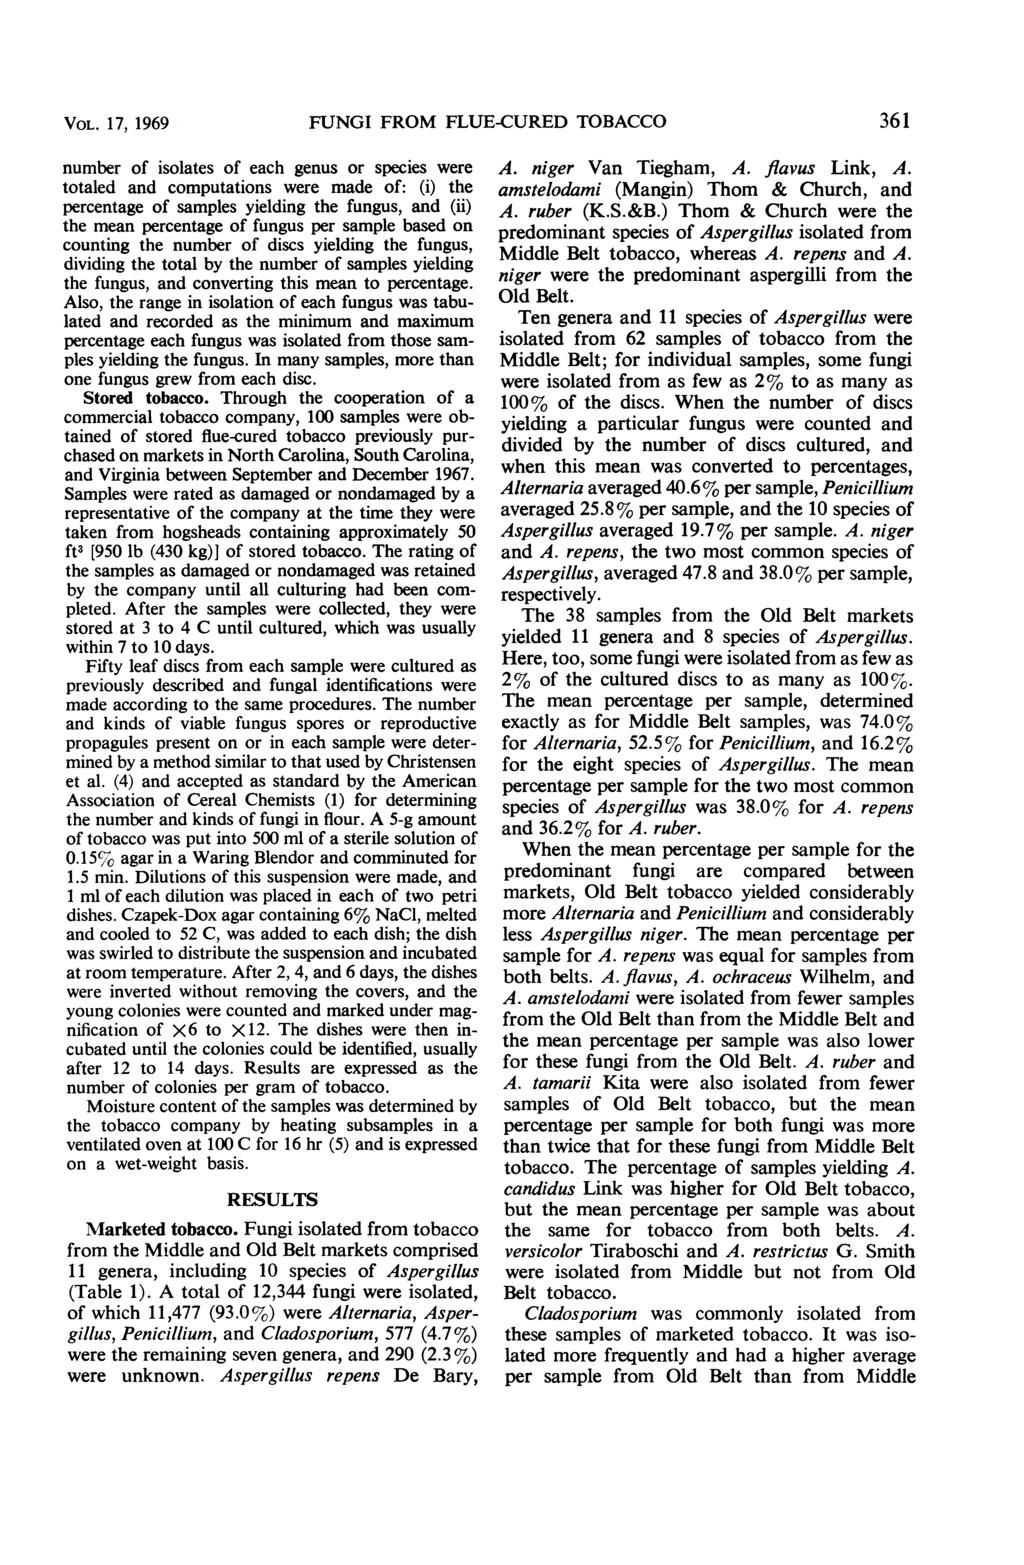 VOL. 17, 1969 FUNGI FROM FLUE-CURED TOBACCO 361 number of isolates of each genus or species were totaled and computations were made of: (i) the percentage of samples yielding the fungus, and (ii) the